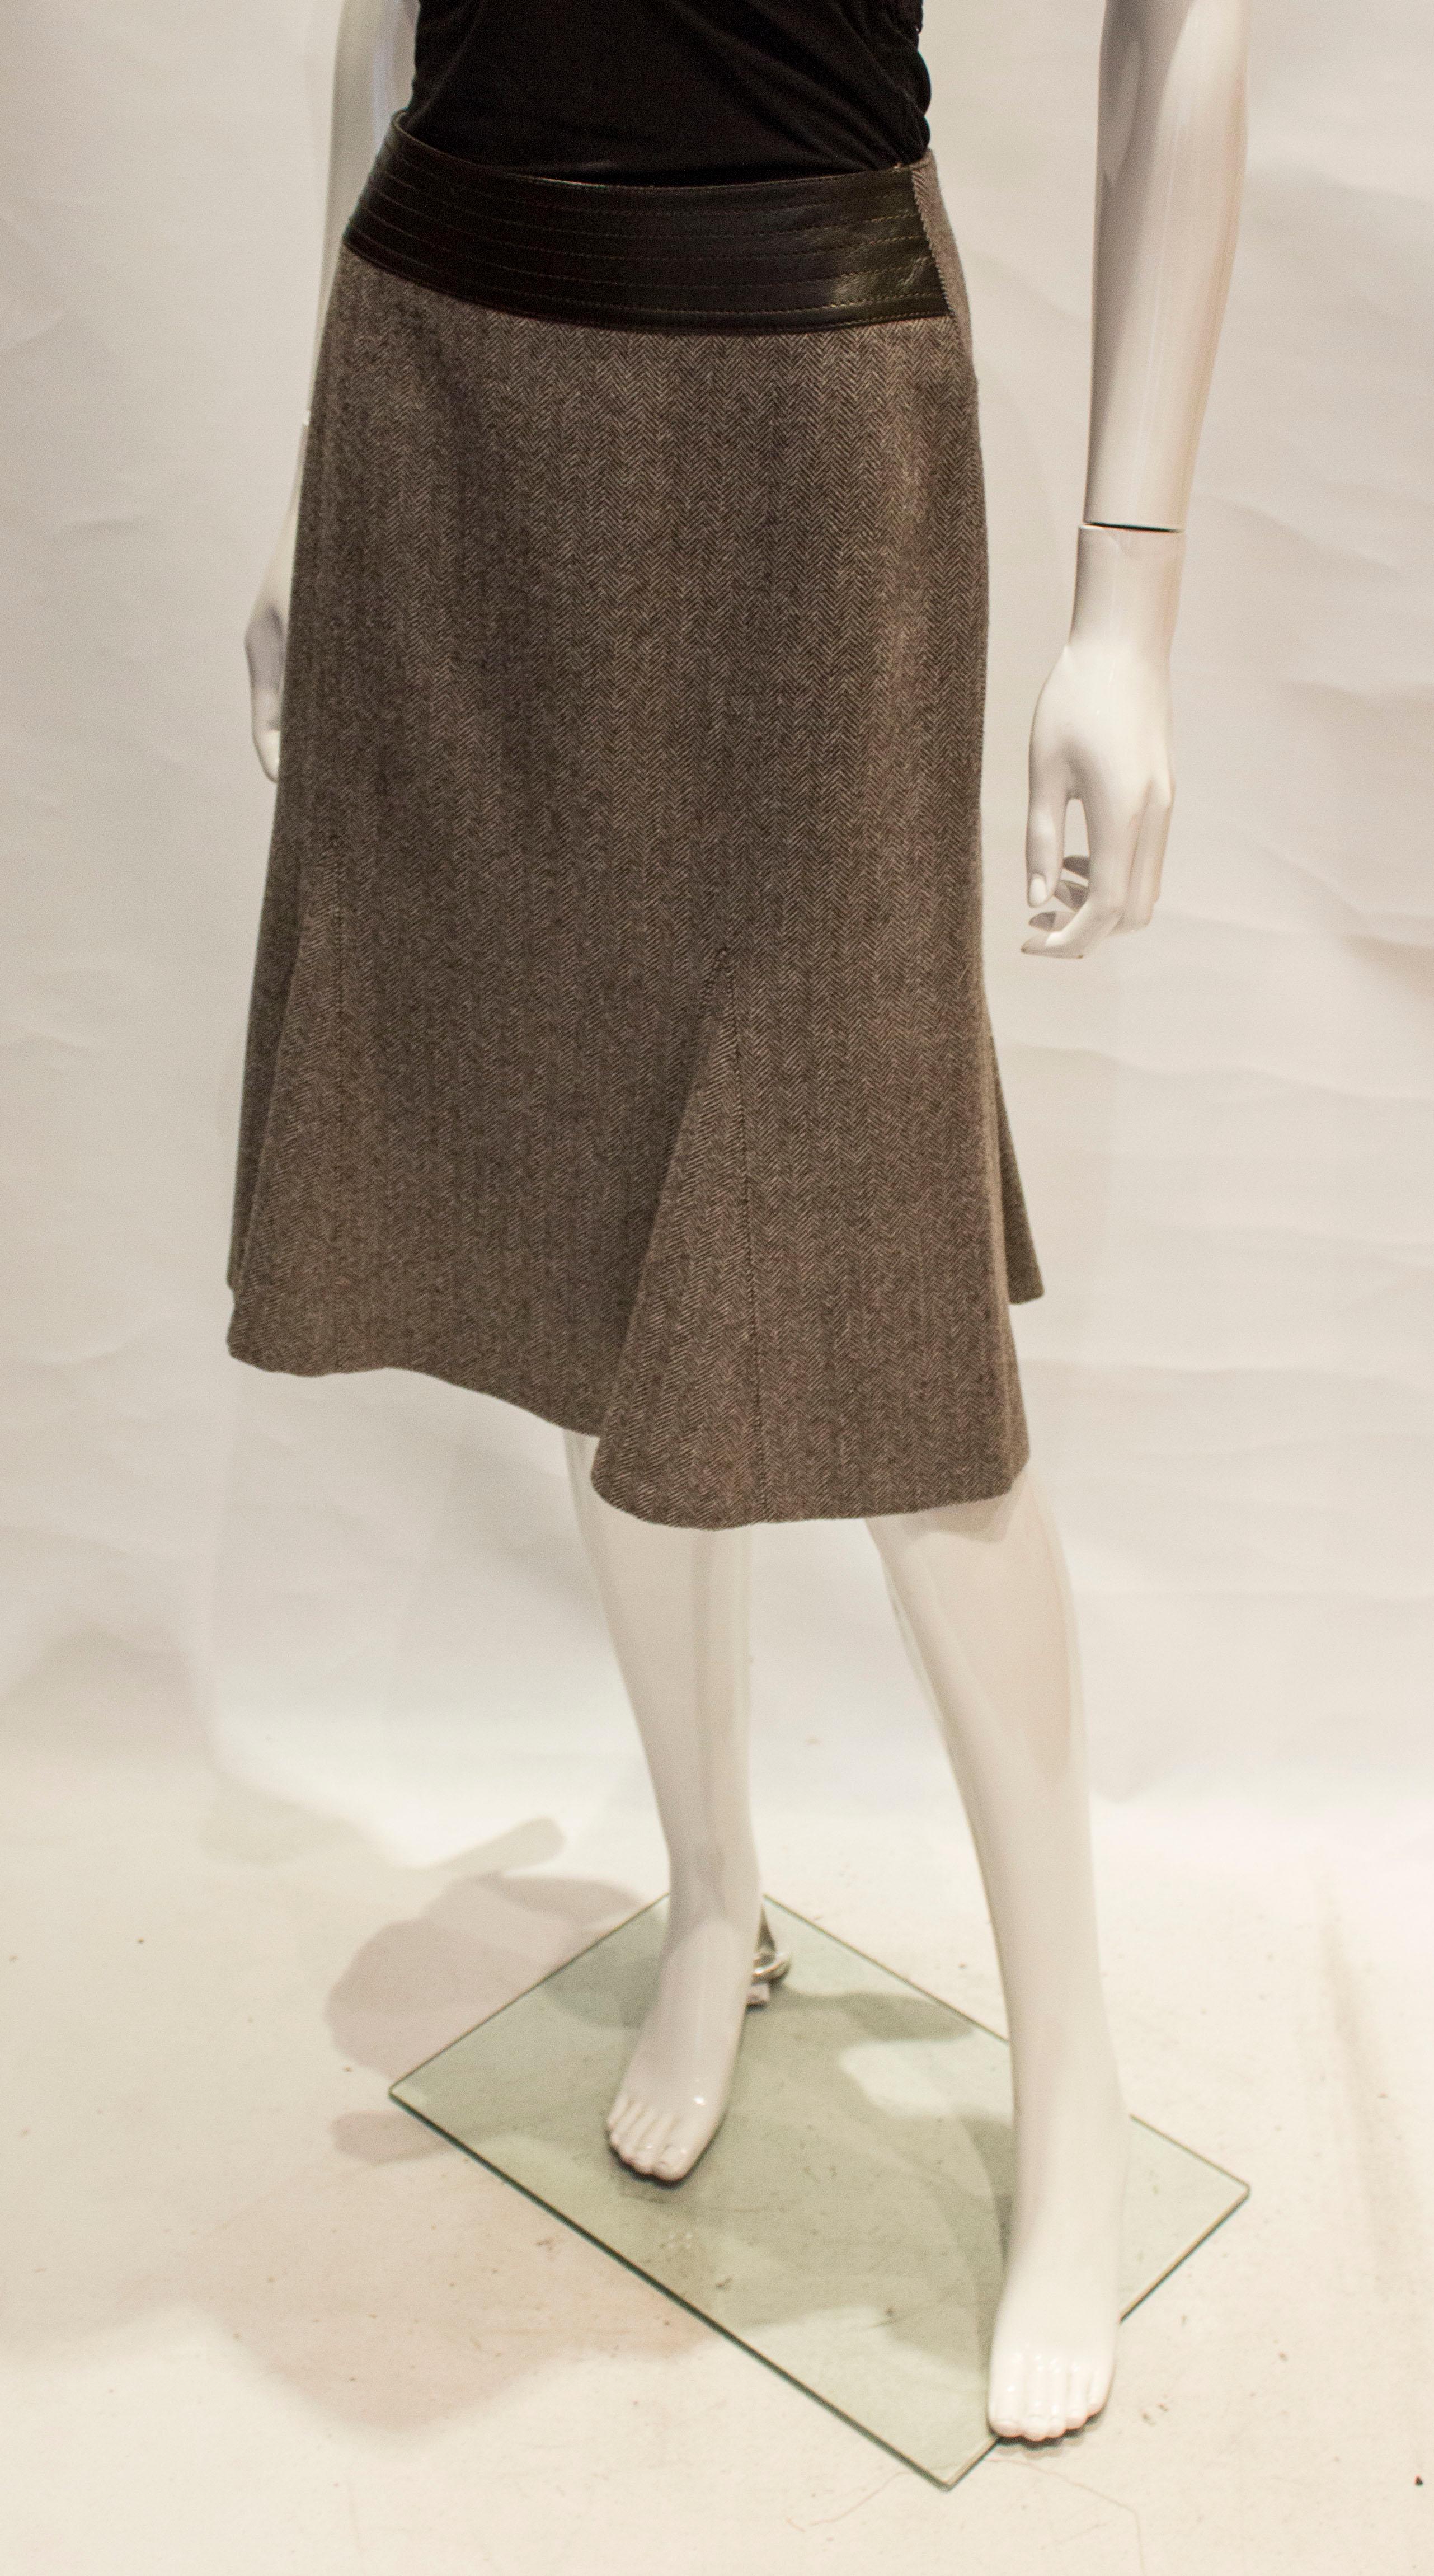 A great vintage skirt suit by joseph. In a brown wool herrngbone , the skirt is flared at the hem and has an interesting leather waistband at the back. It is marked a size M and is fully  lined.
Waist 30 '', length 26''

The jacket has a one button